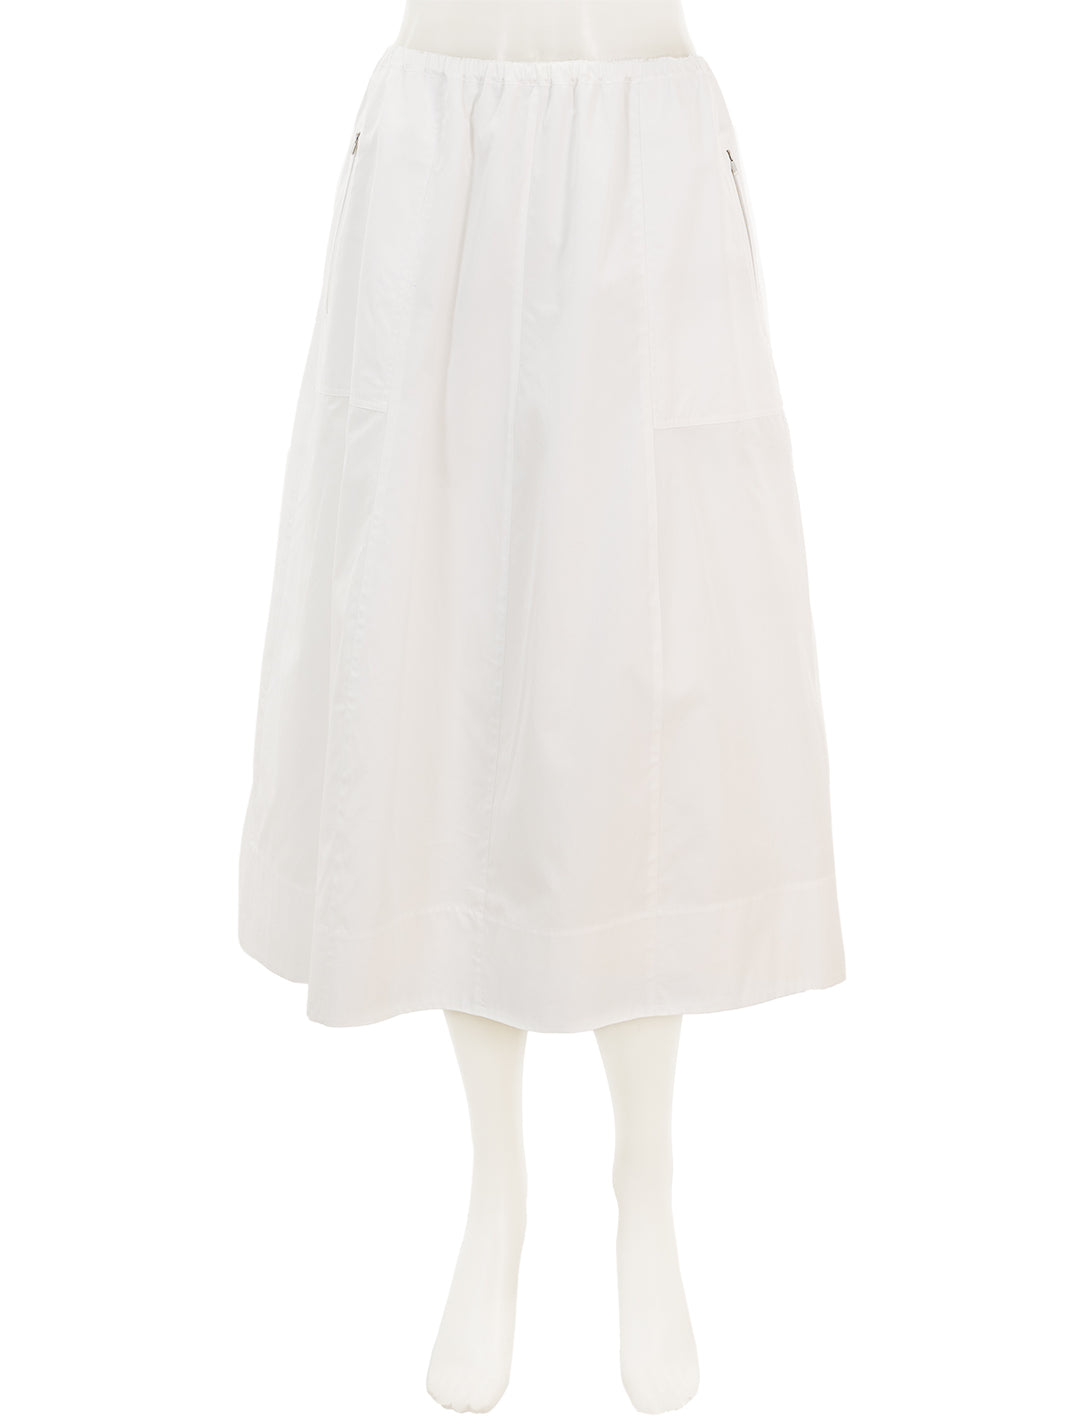 Front view of Vince's gathered utility zipper pocket skirt in optic white.